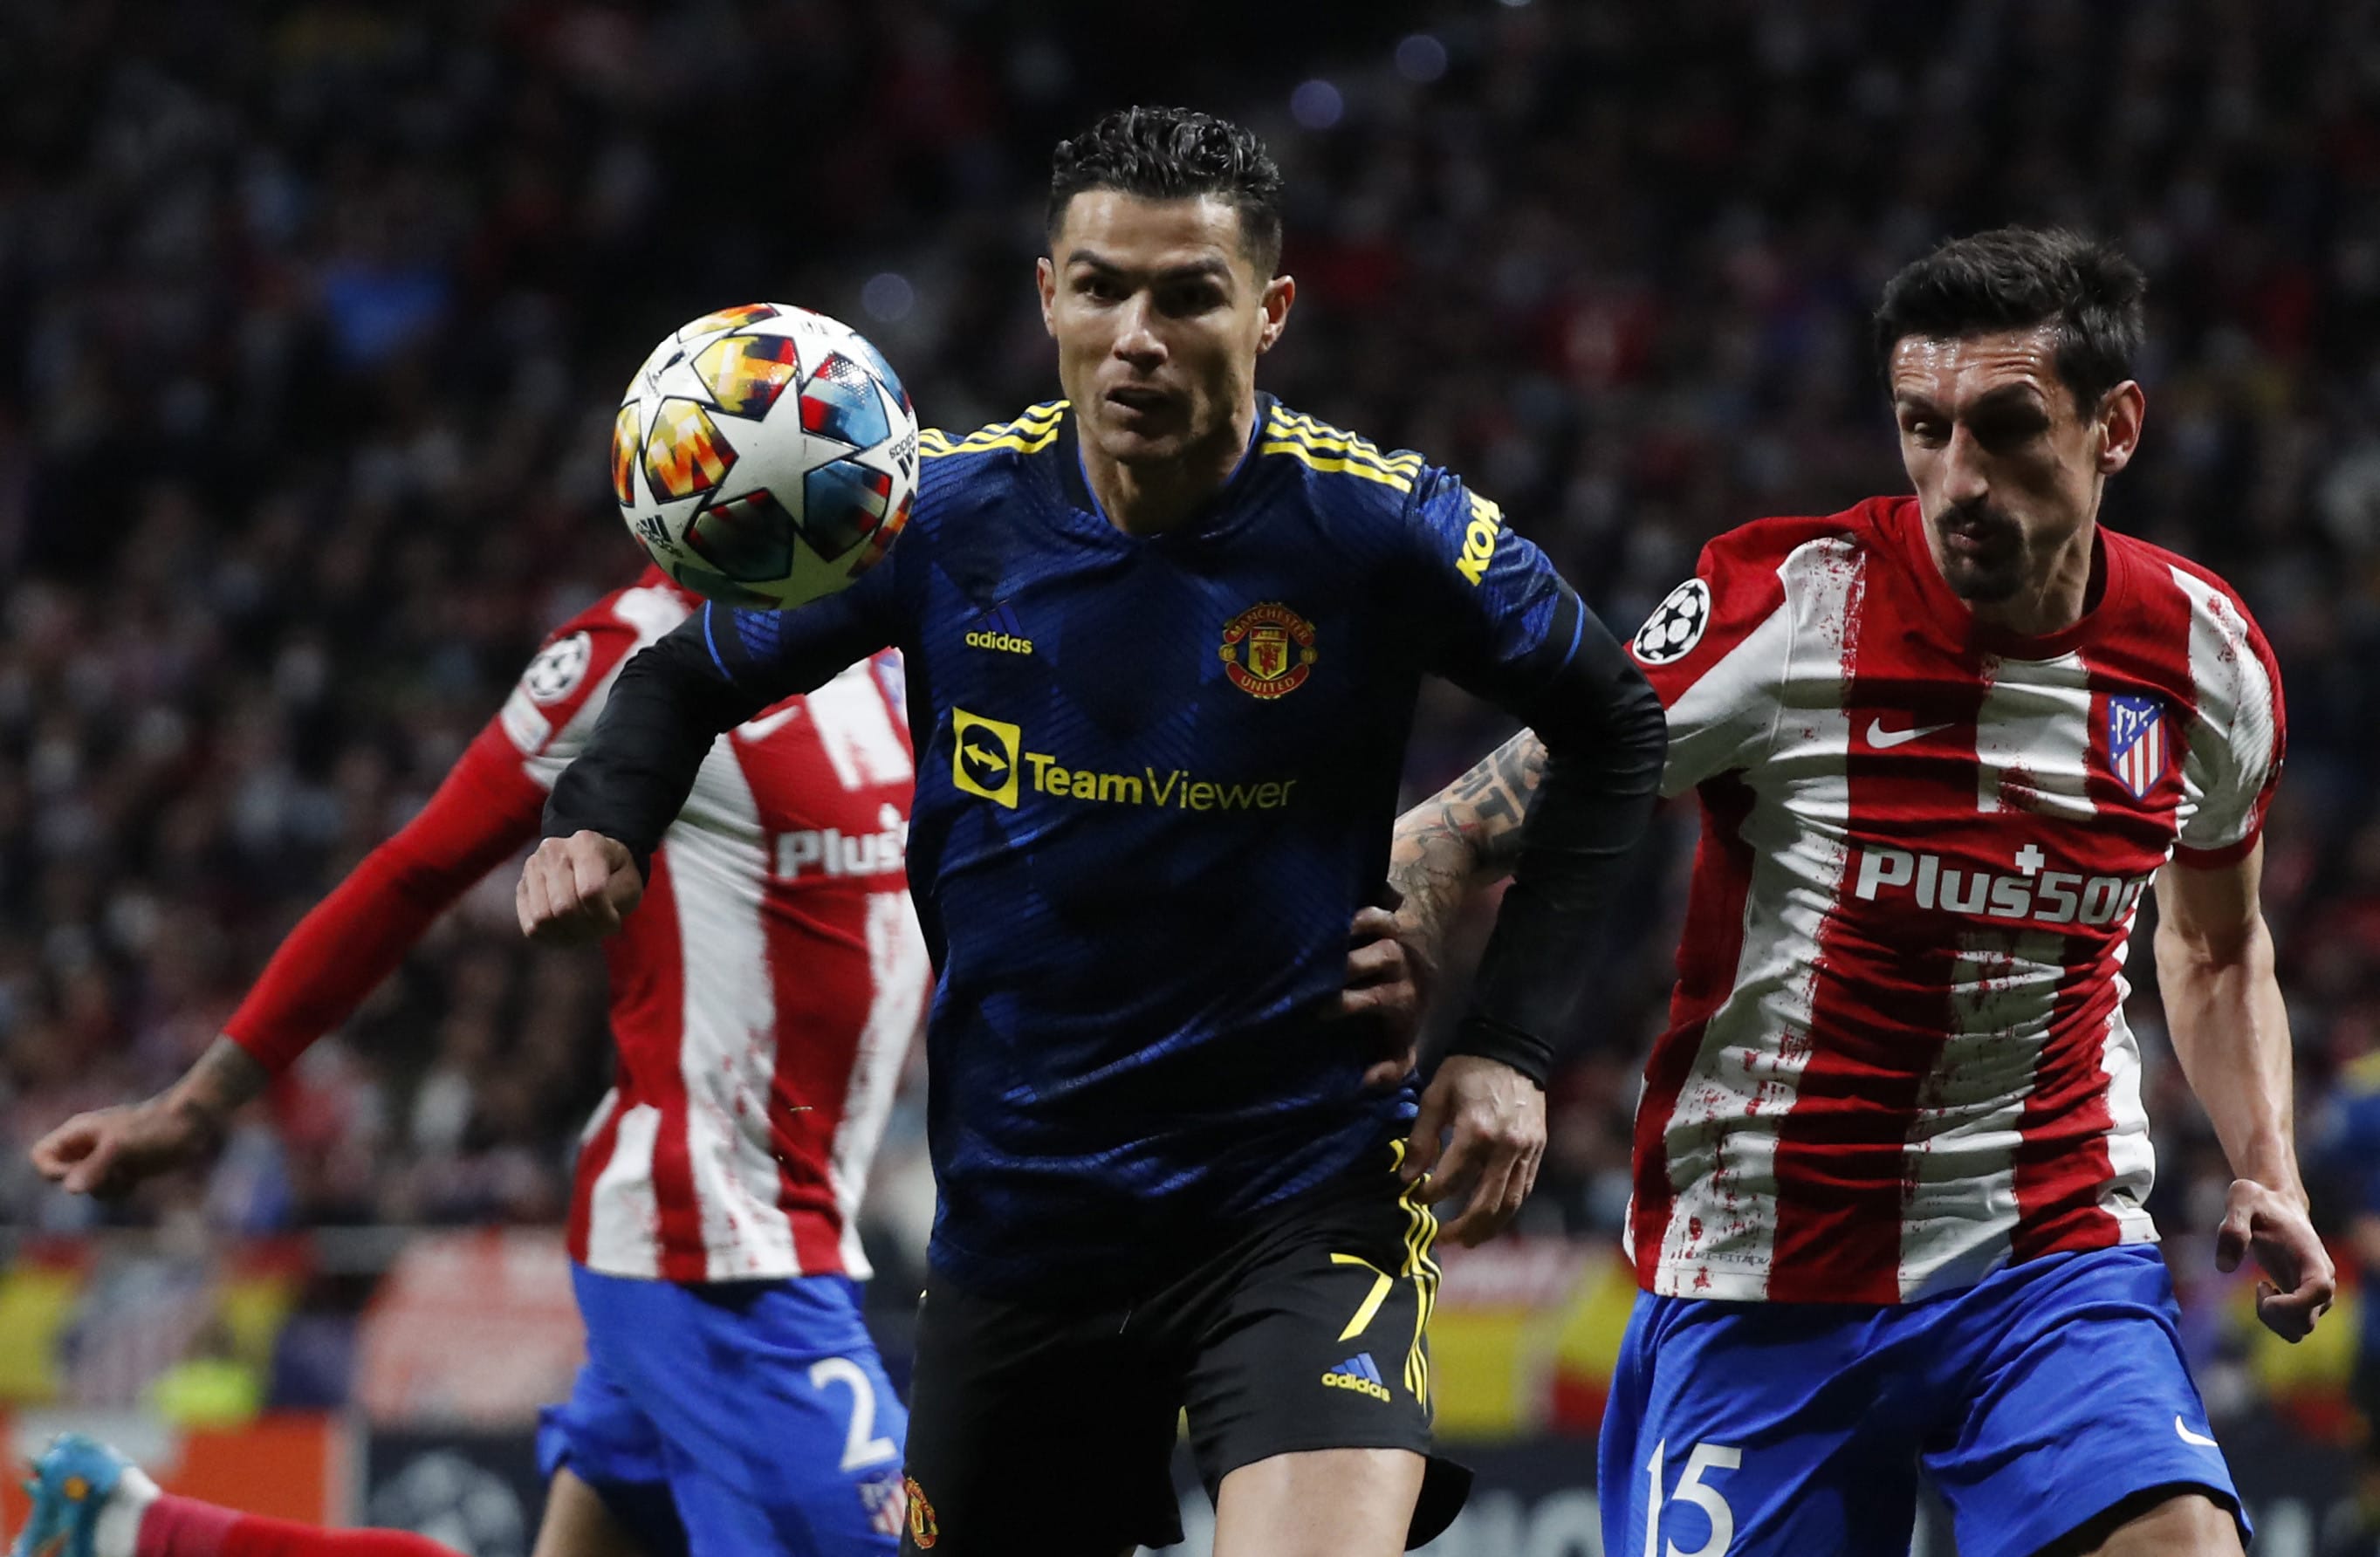 Manchester United player Cristiano Ronaldo against Atletico Madrid player Stefan Savic